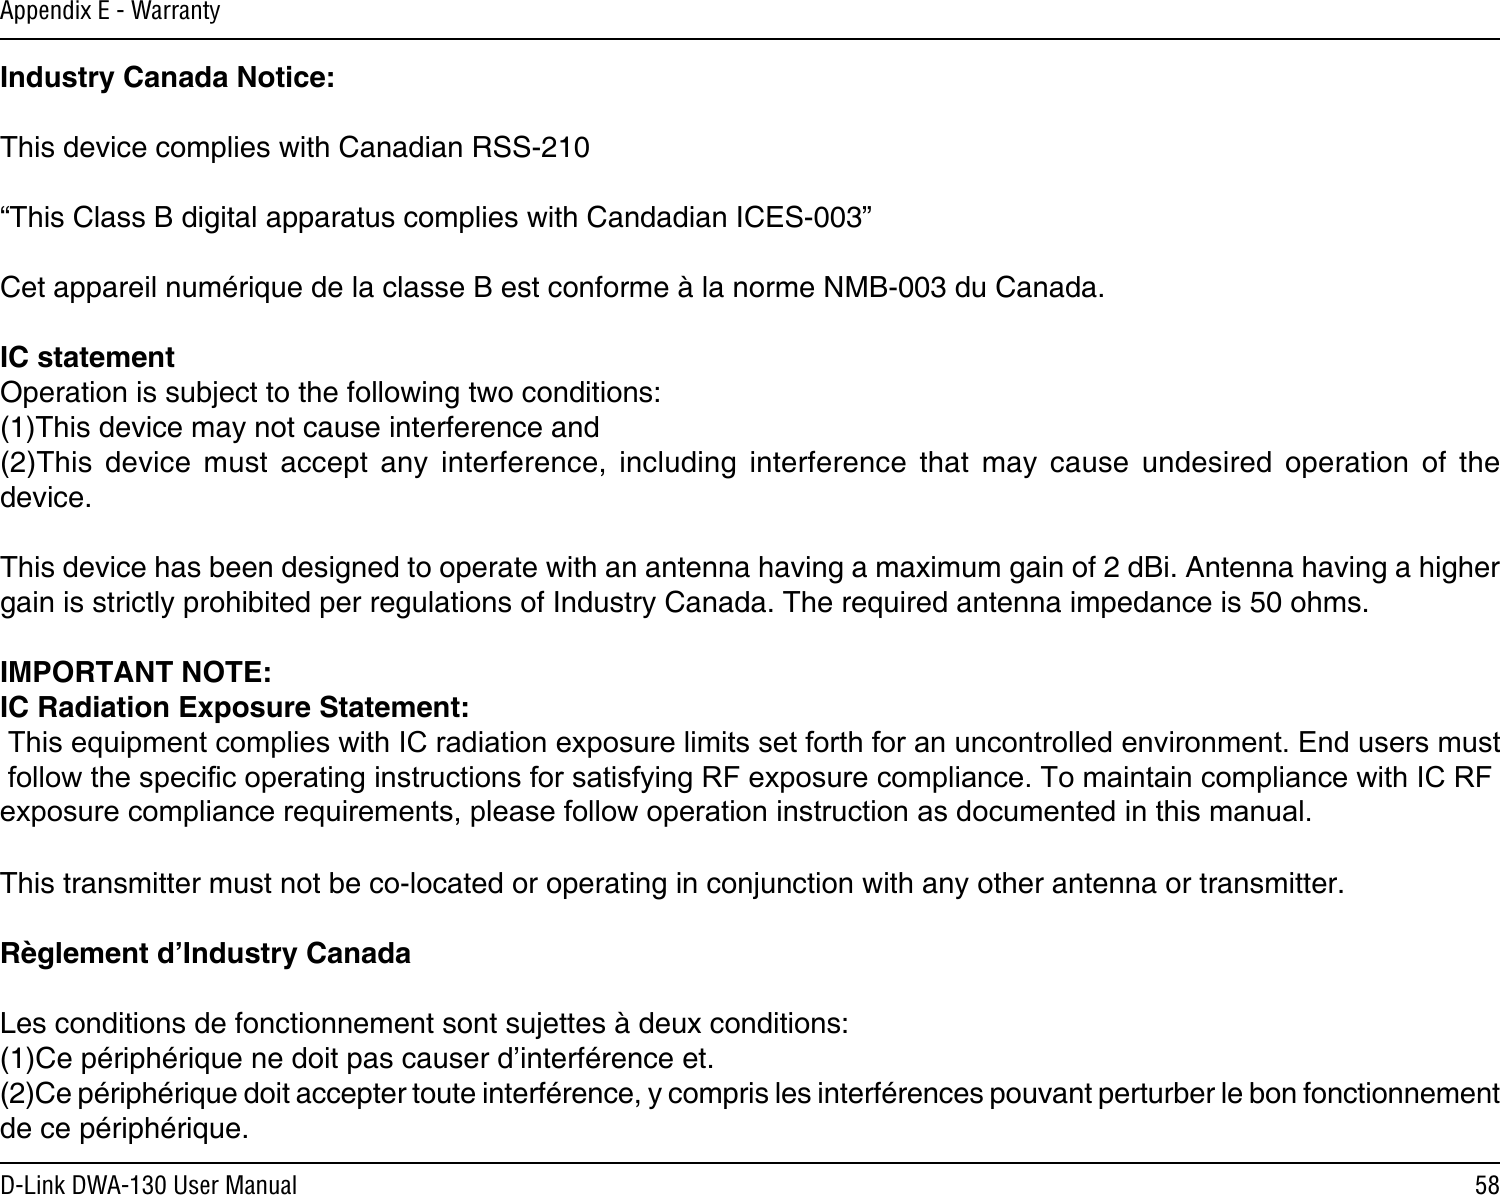 58D-Link DWA-130 User ManualAppendix E - WarrantyIndustry Canada Notice:This device complies with Canadian RSS-210“This Class B digital apparatus complies with Candadian ICES-003”Cet appareil numérique de la classe B est conforme à la norme NMB-003 du Canada.IC statementOperation is subject to the following two conditions: (1)This device may not cause interference and (2)This  device  must  accept  any  interference,  including  interference  that  may  cause  undesired  operation  of  the device. This device has been designed to operate with an antenna having a maximum gain of 2 dBi. Antenna having a higher gain is strictly prohibited per regulations of Industry Canada. The required antenna impedance is 50 ohms. IMPORTANT NOTE: IC Radiation Exposure Statement: This equipment complies with IC radiation exposure limits set forth for an uncontrolled environment. End users must follow the specific operating instructions for satisfying RF exposure compliance. To maintain compliance with IC RF exposure compliance requirements, please follow operation instruction as documented in this manual. This transmitter must not be co-located or operating in conjunction with any other antenna or transmitter. Règlement d’Industry Canada Les conditions de fonctionnement sont sujettes à deux conditions: (1)Ce périphérique ne doit pas causer d’interférence et. (2)Ce périphérique doit accepter toute interférence, y compris les interférences pouvant perturber le bon fonctionnement de ce périphérique.